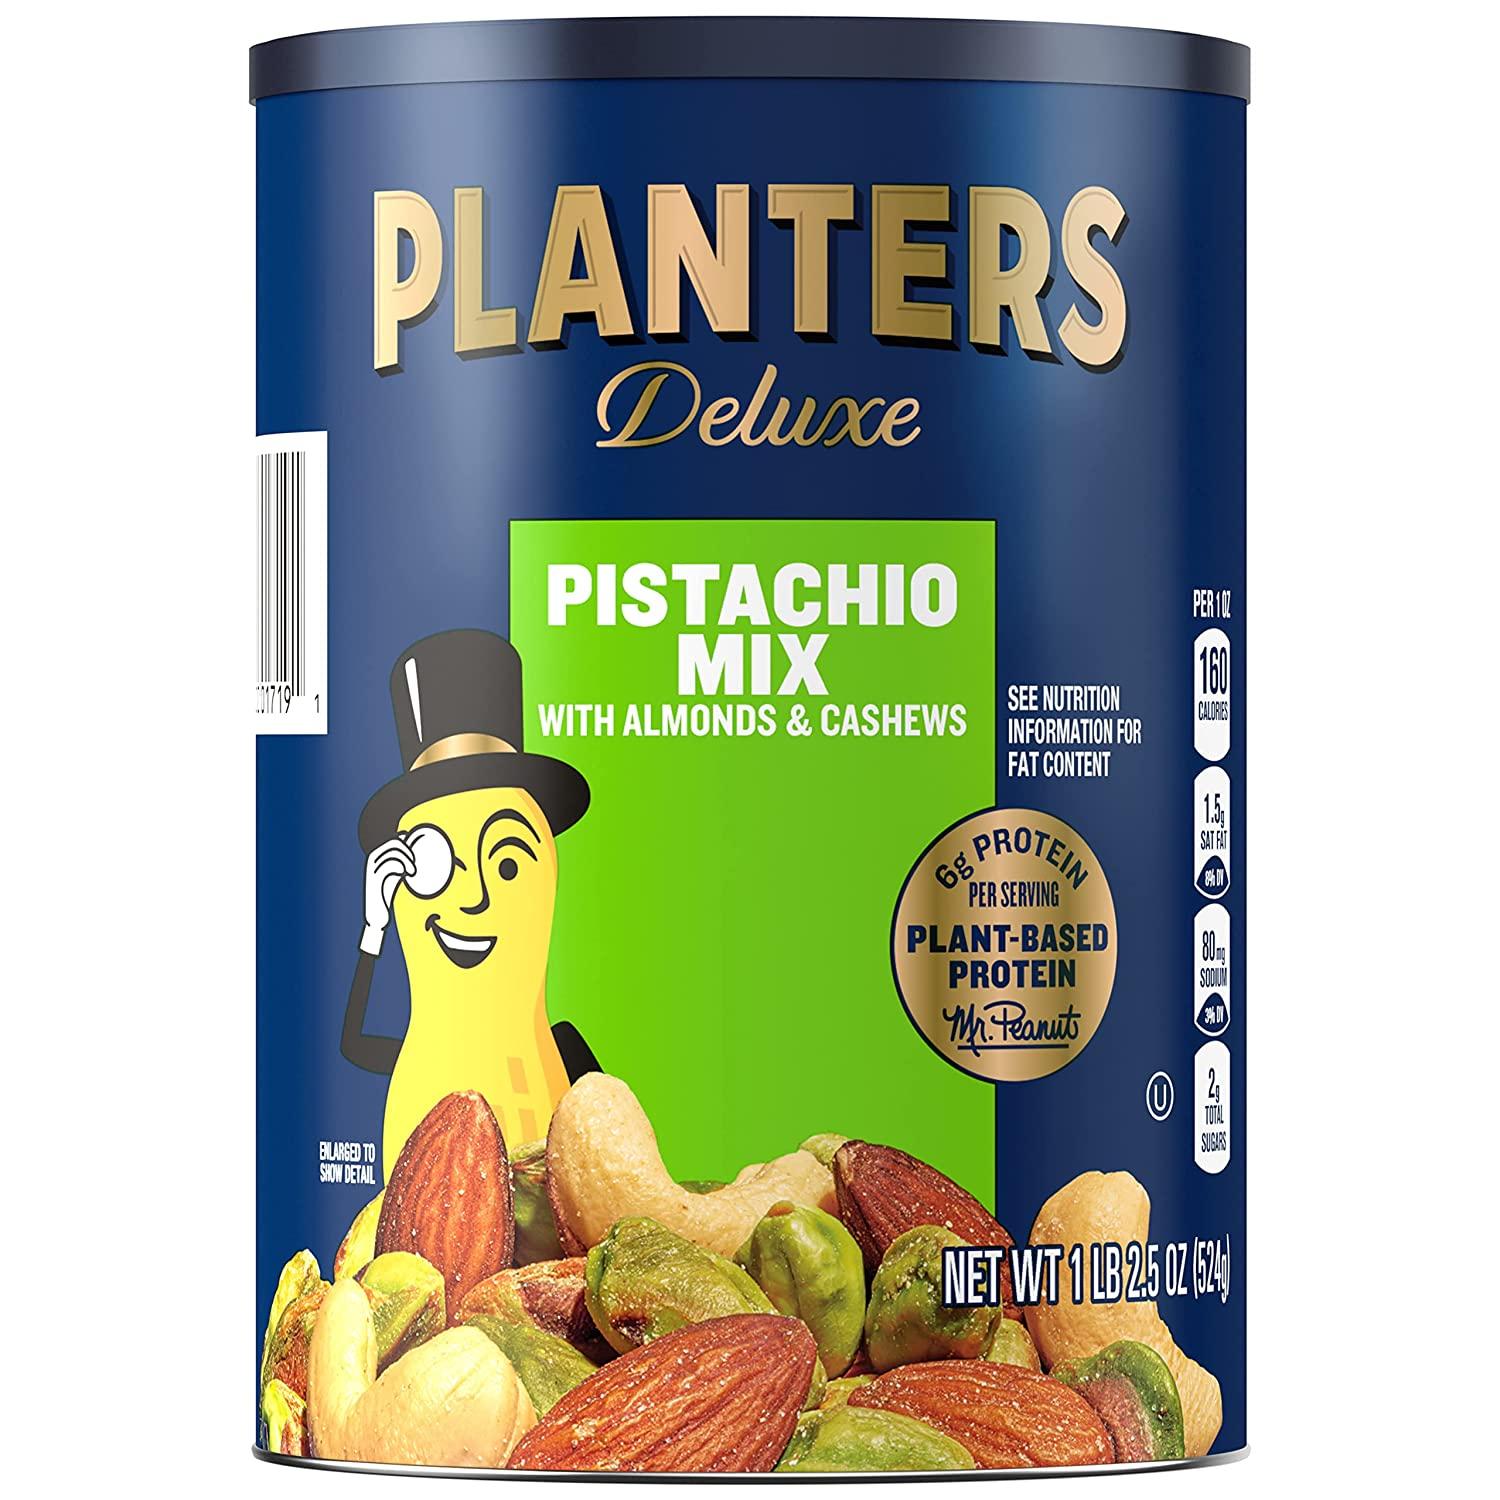 Planters Deluxe Pistachio Mix for $7.58 Shipped